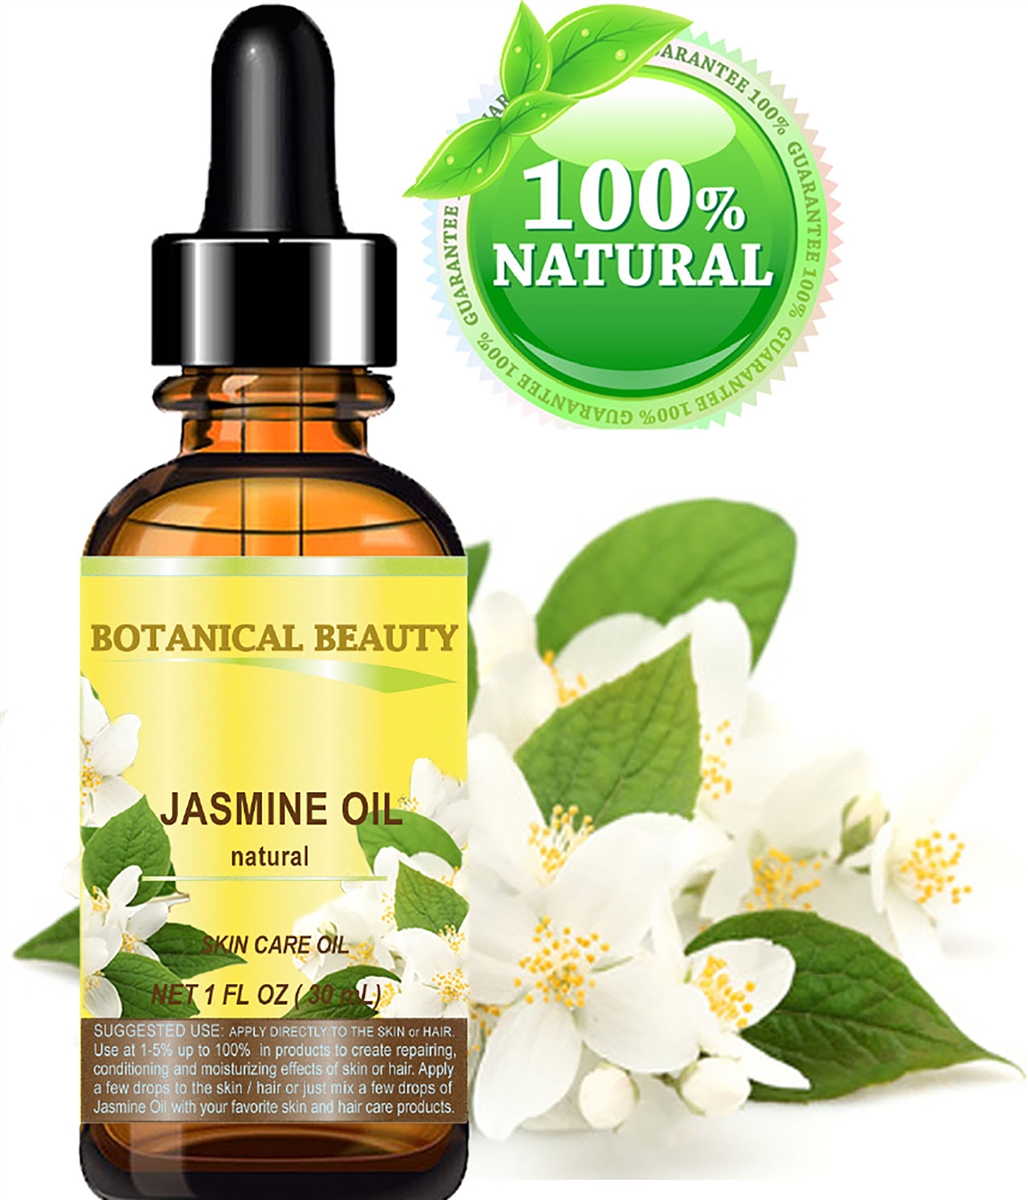 What Is Jasmine Oil and How Is It Used in Skincare